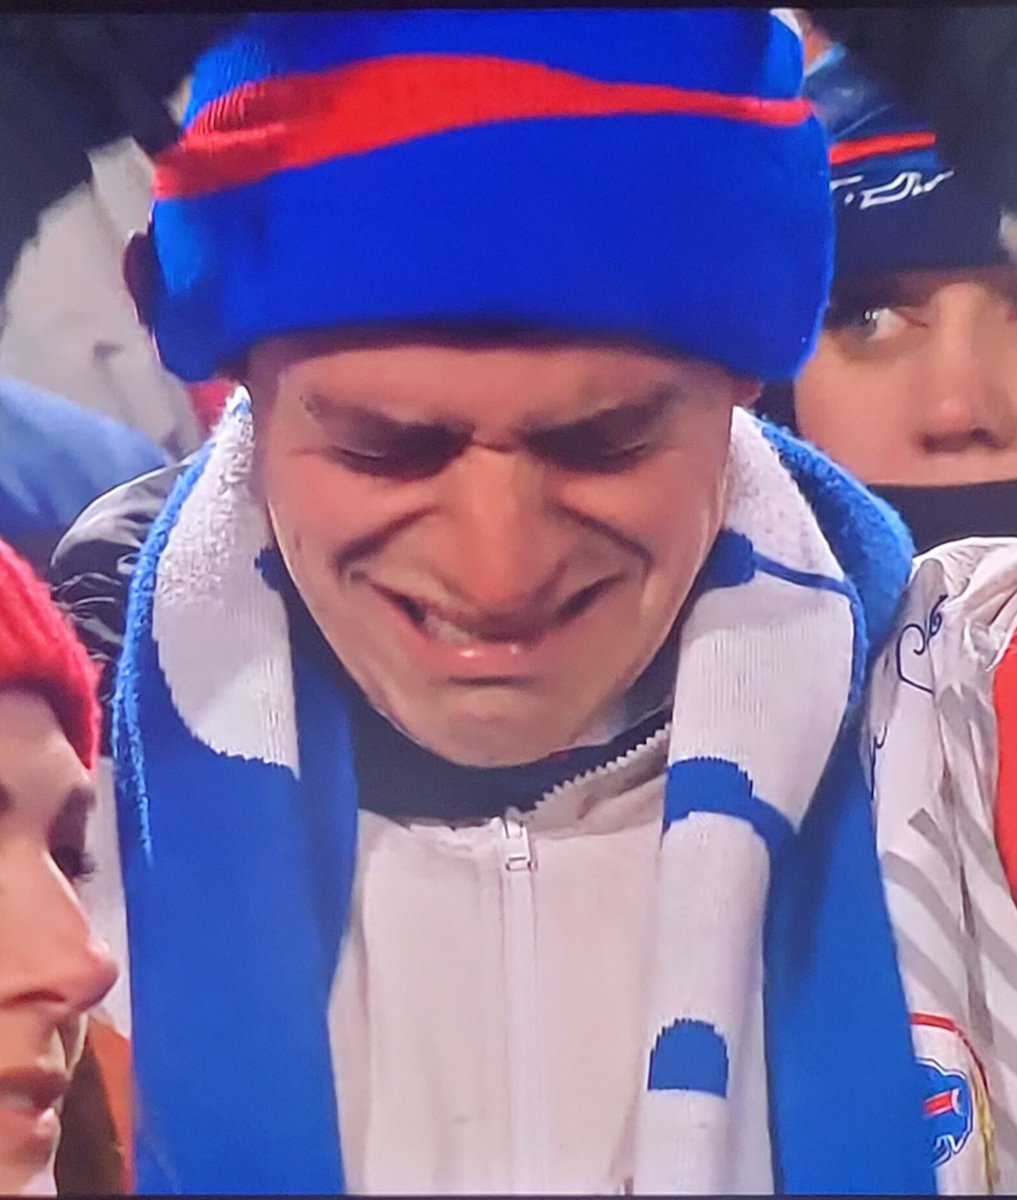 Wimp! He wouldn't last one season as a Bears fan. 🤣🤣🤣 #NFLPlayoffs #BillsMafia  #NFLDivisionalRound